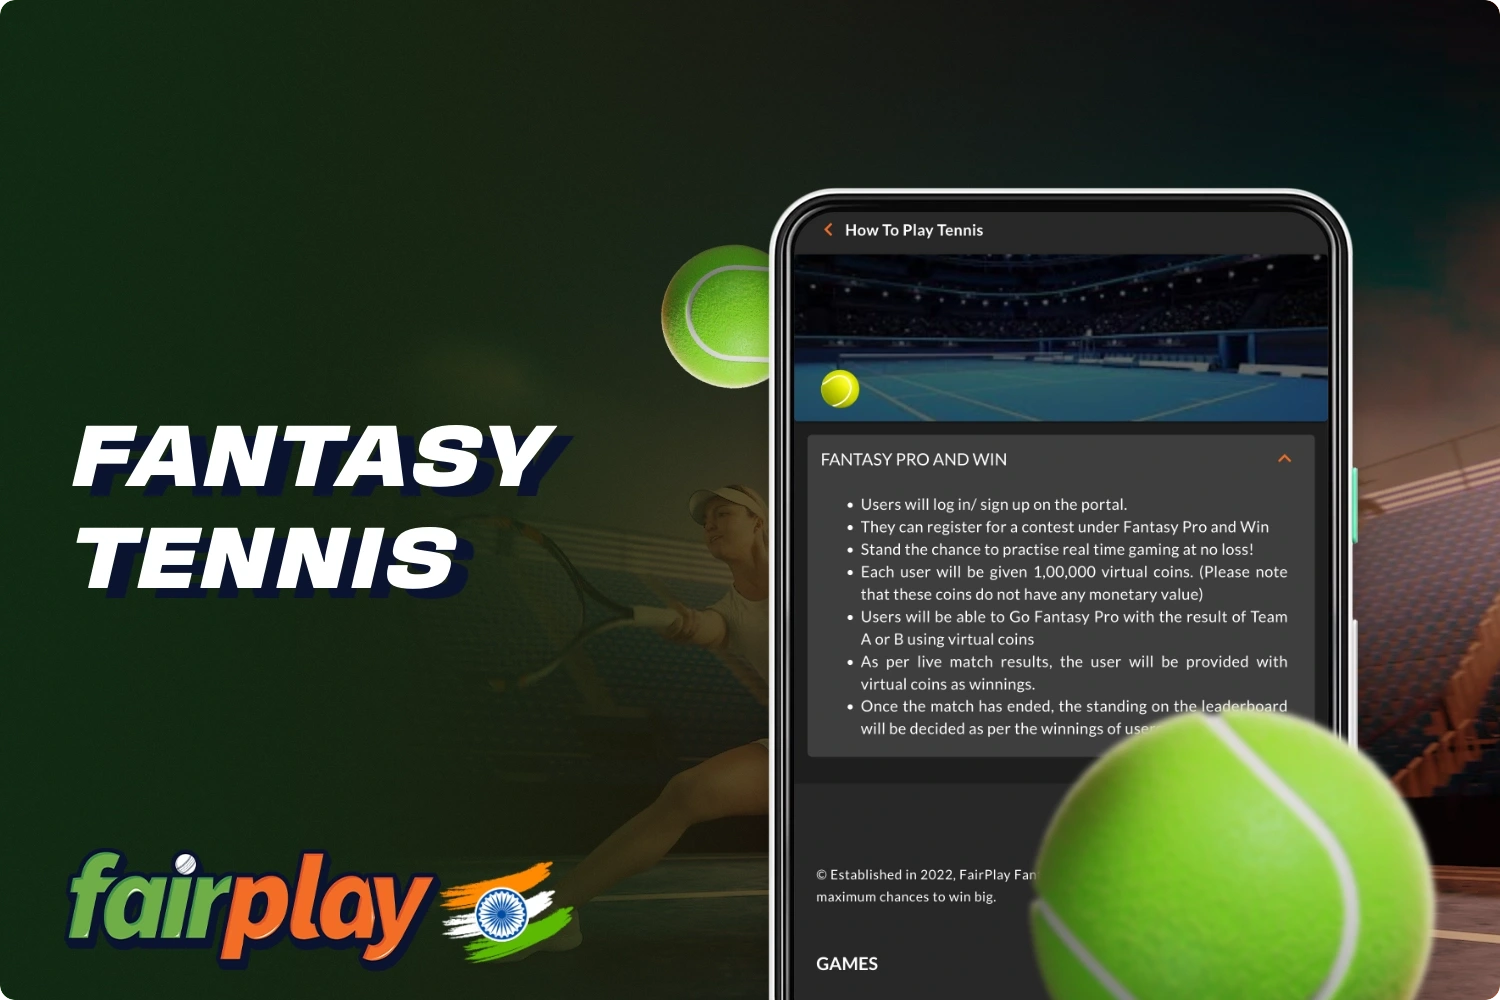 Fantasy tennis in Fairplay is available to all registered users